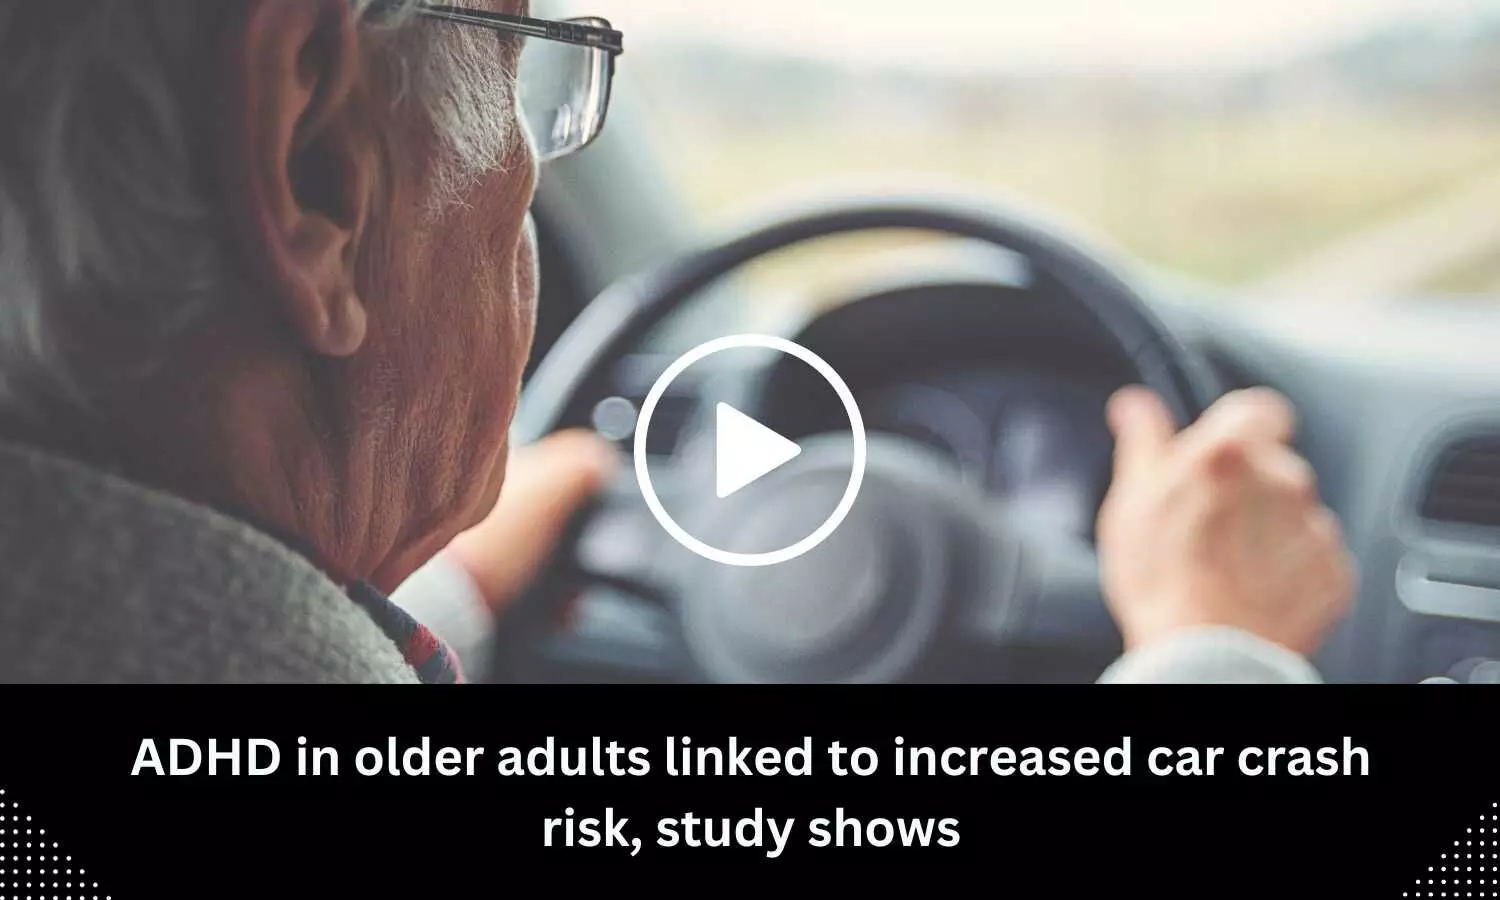 ADHD in older adults linked to increased car crash risk, study shows